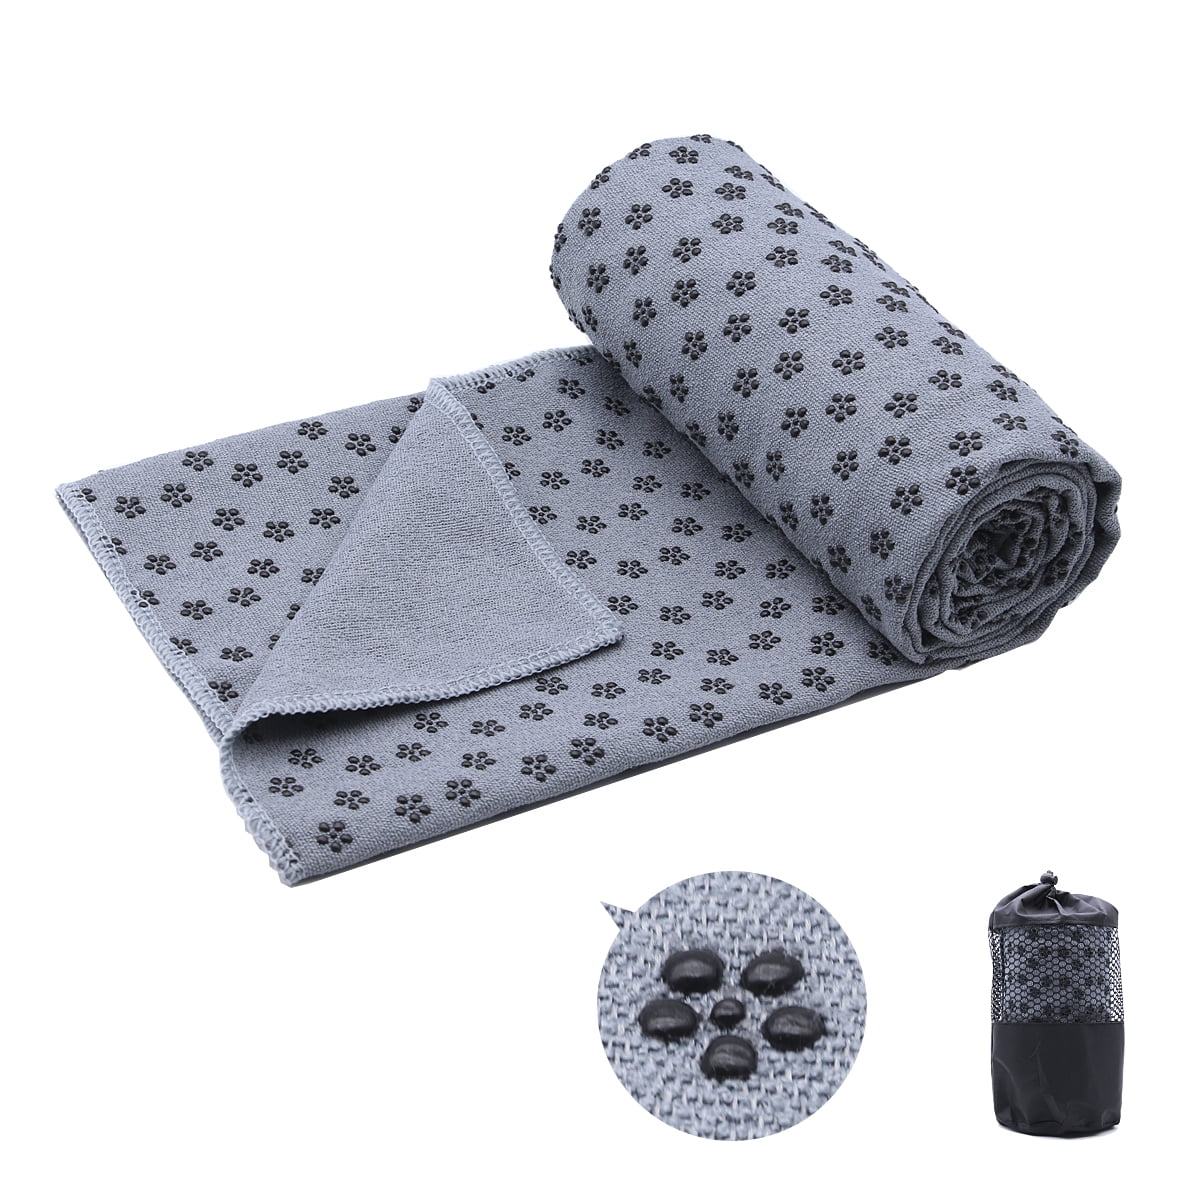 Yoga Towel,Hot Yoga Mat Towel with Grip Dots Sweat Absorbent Non-Slip for  Hot Yoga, Pilates and Workout 24x72, Gray